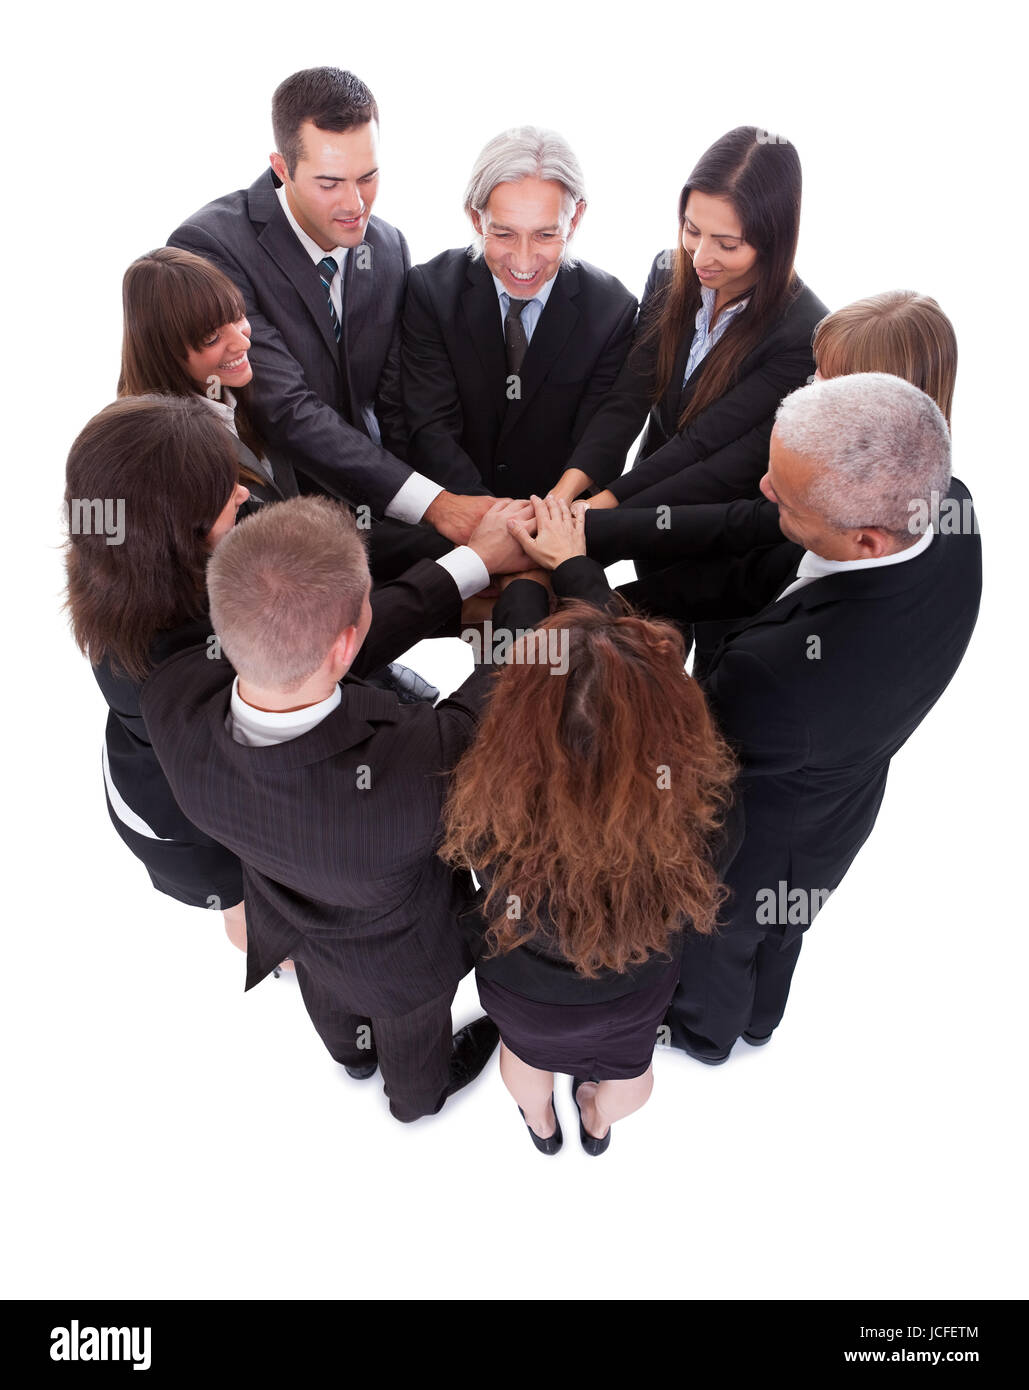 High angle view of a diverse group of people in a business team with their hands one on top of the other Stock Photo